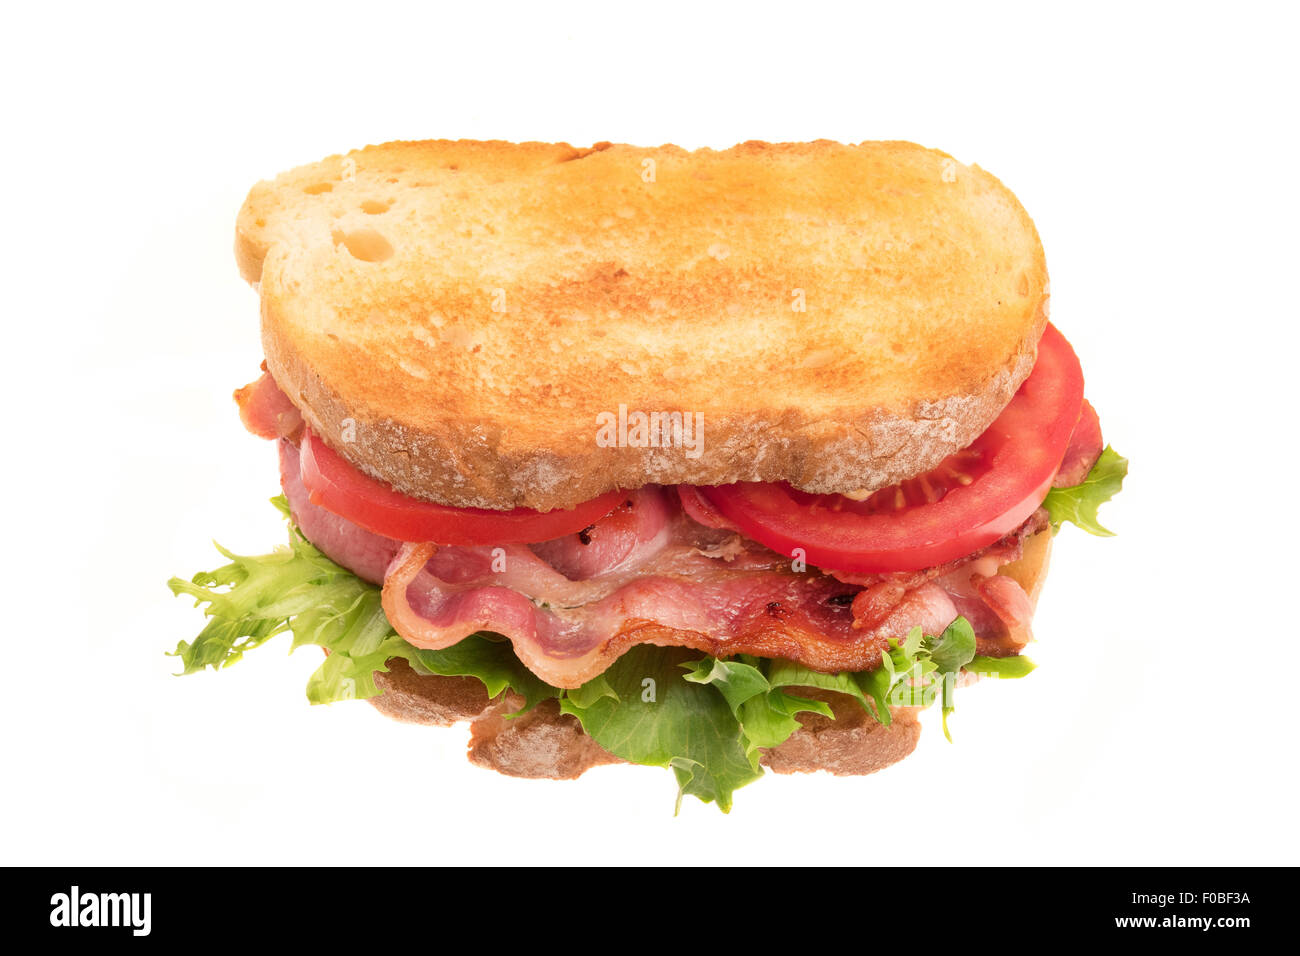 Toasted BLT sandwich - studio shot with a white background Stock Photo